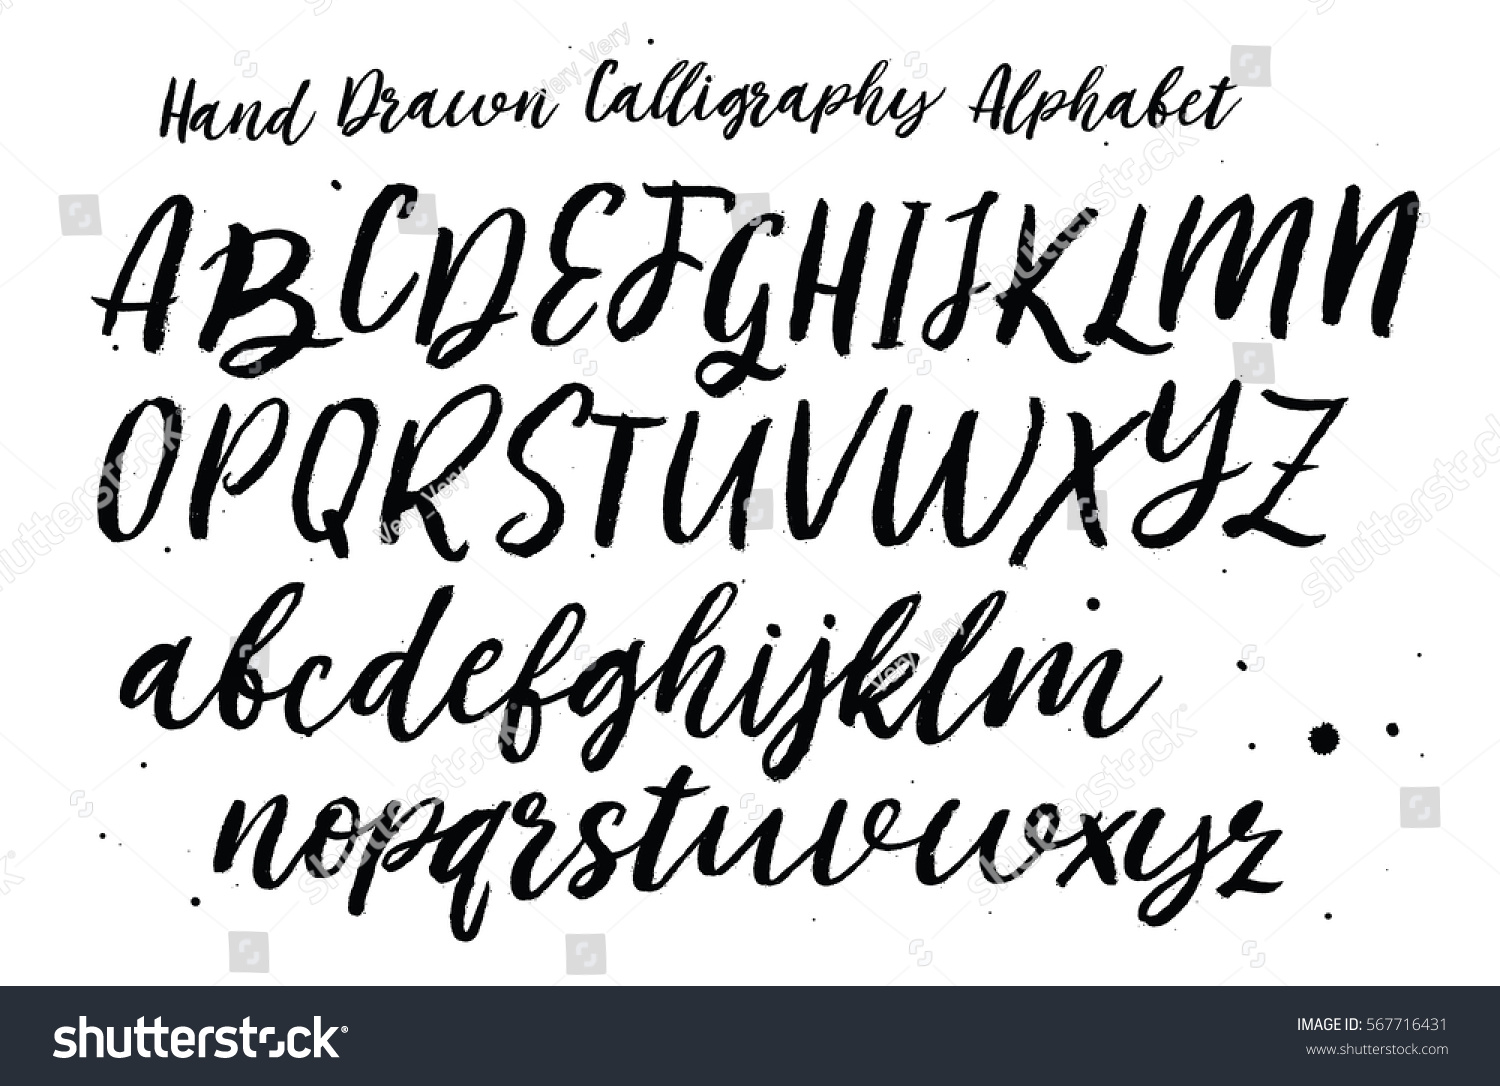 Hand Drawn Typeface Set Brush Painted Stock Vector (Royalty Free ...